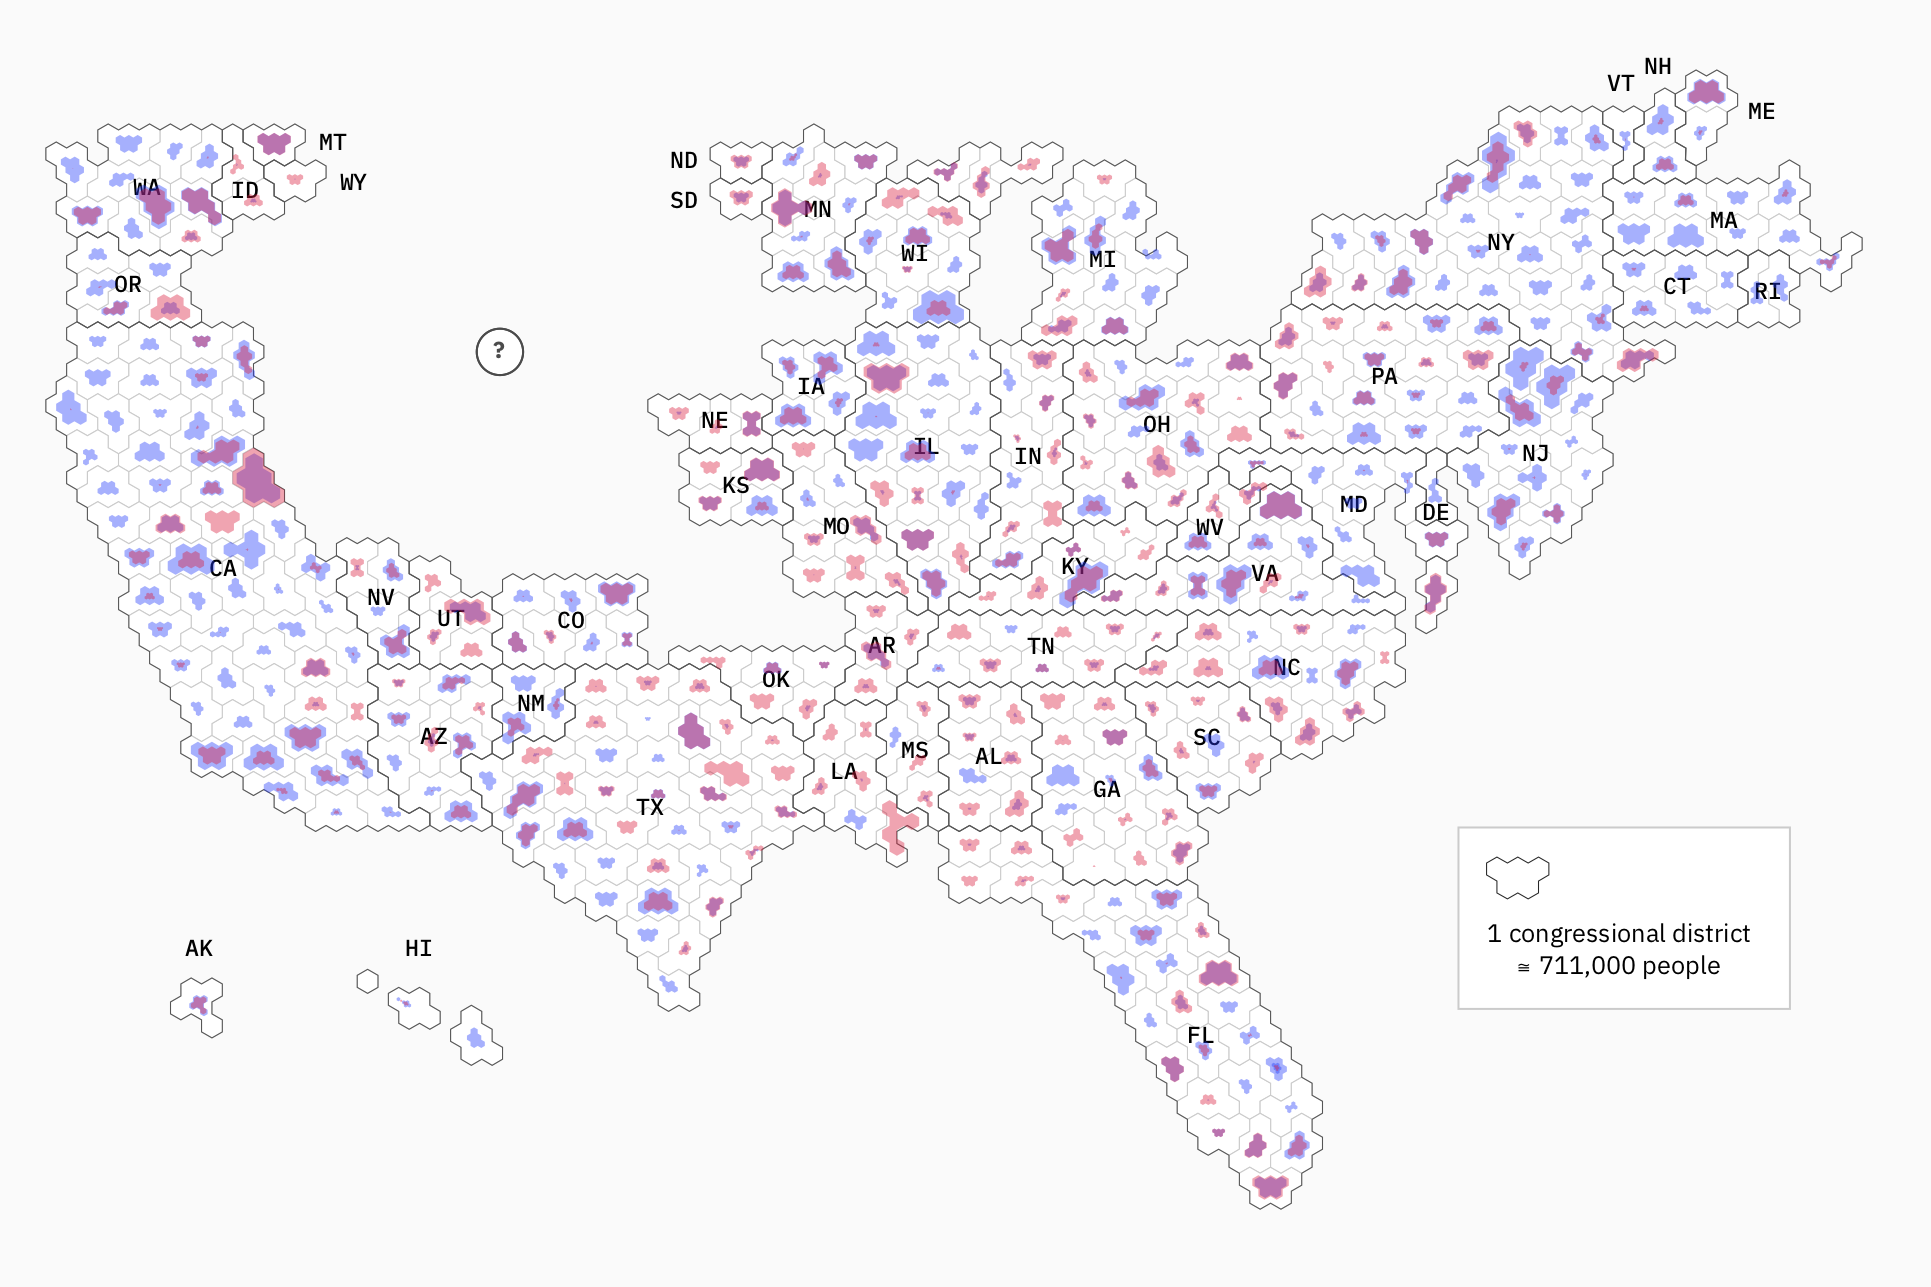 Congressional campaign finance cartogram from United States 2018 elections